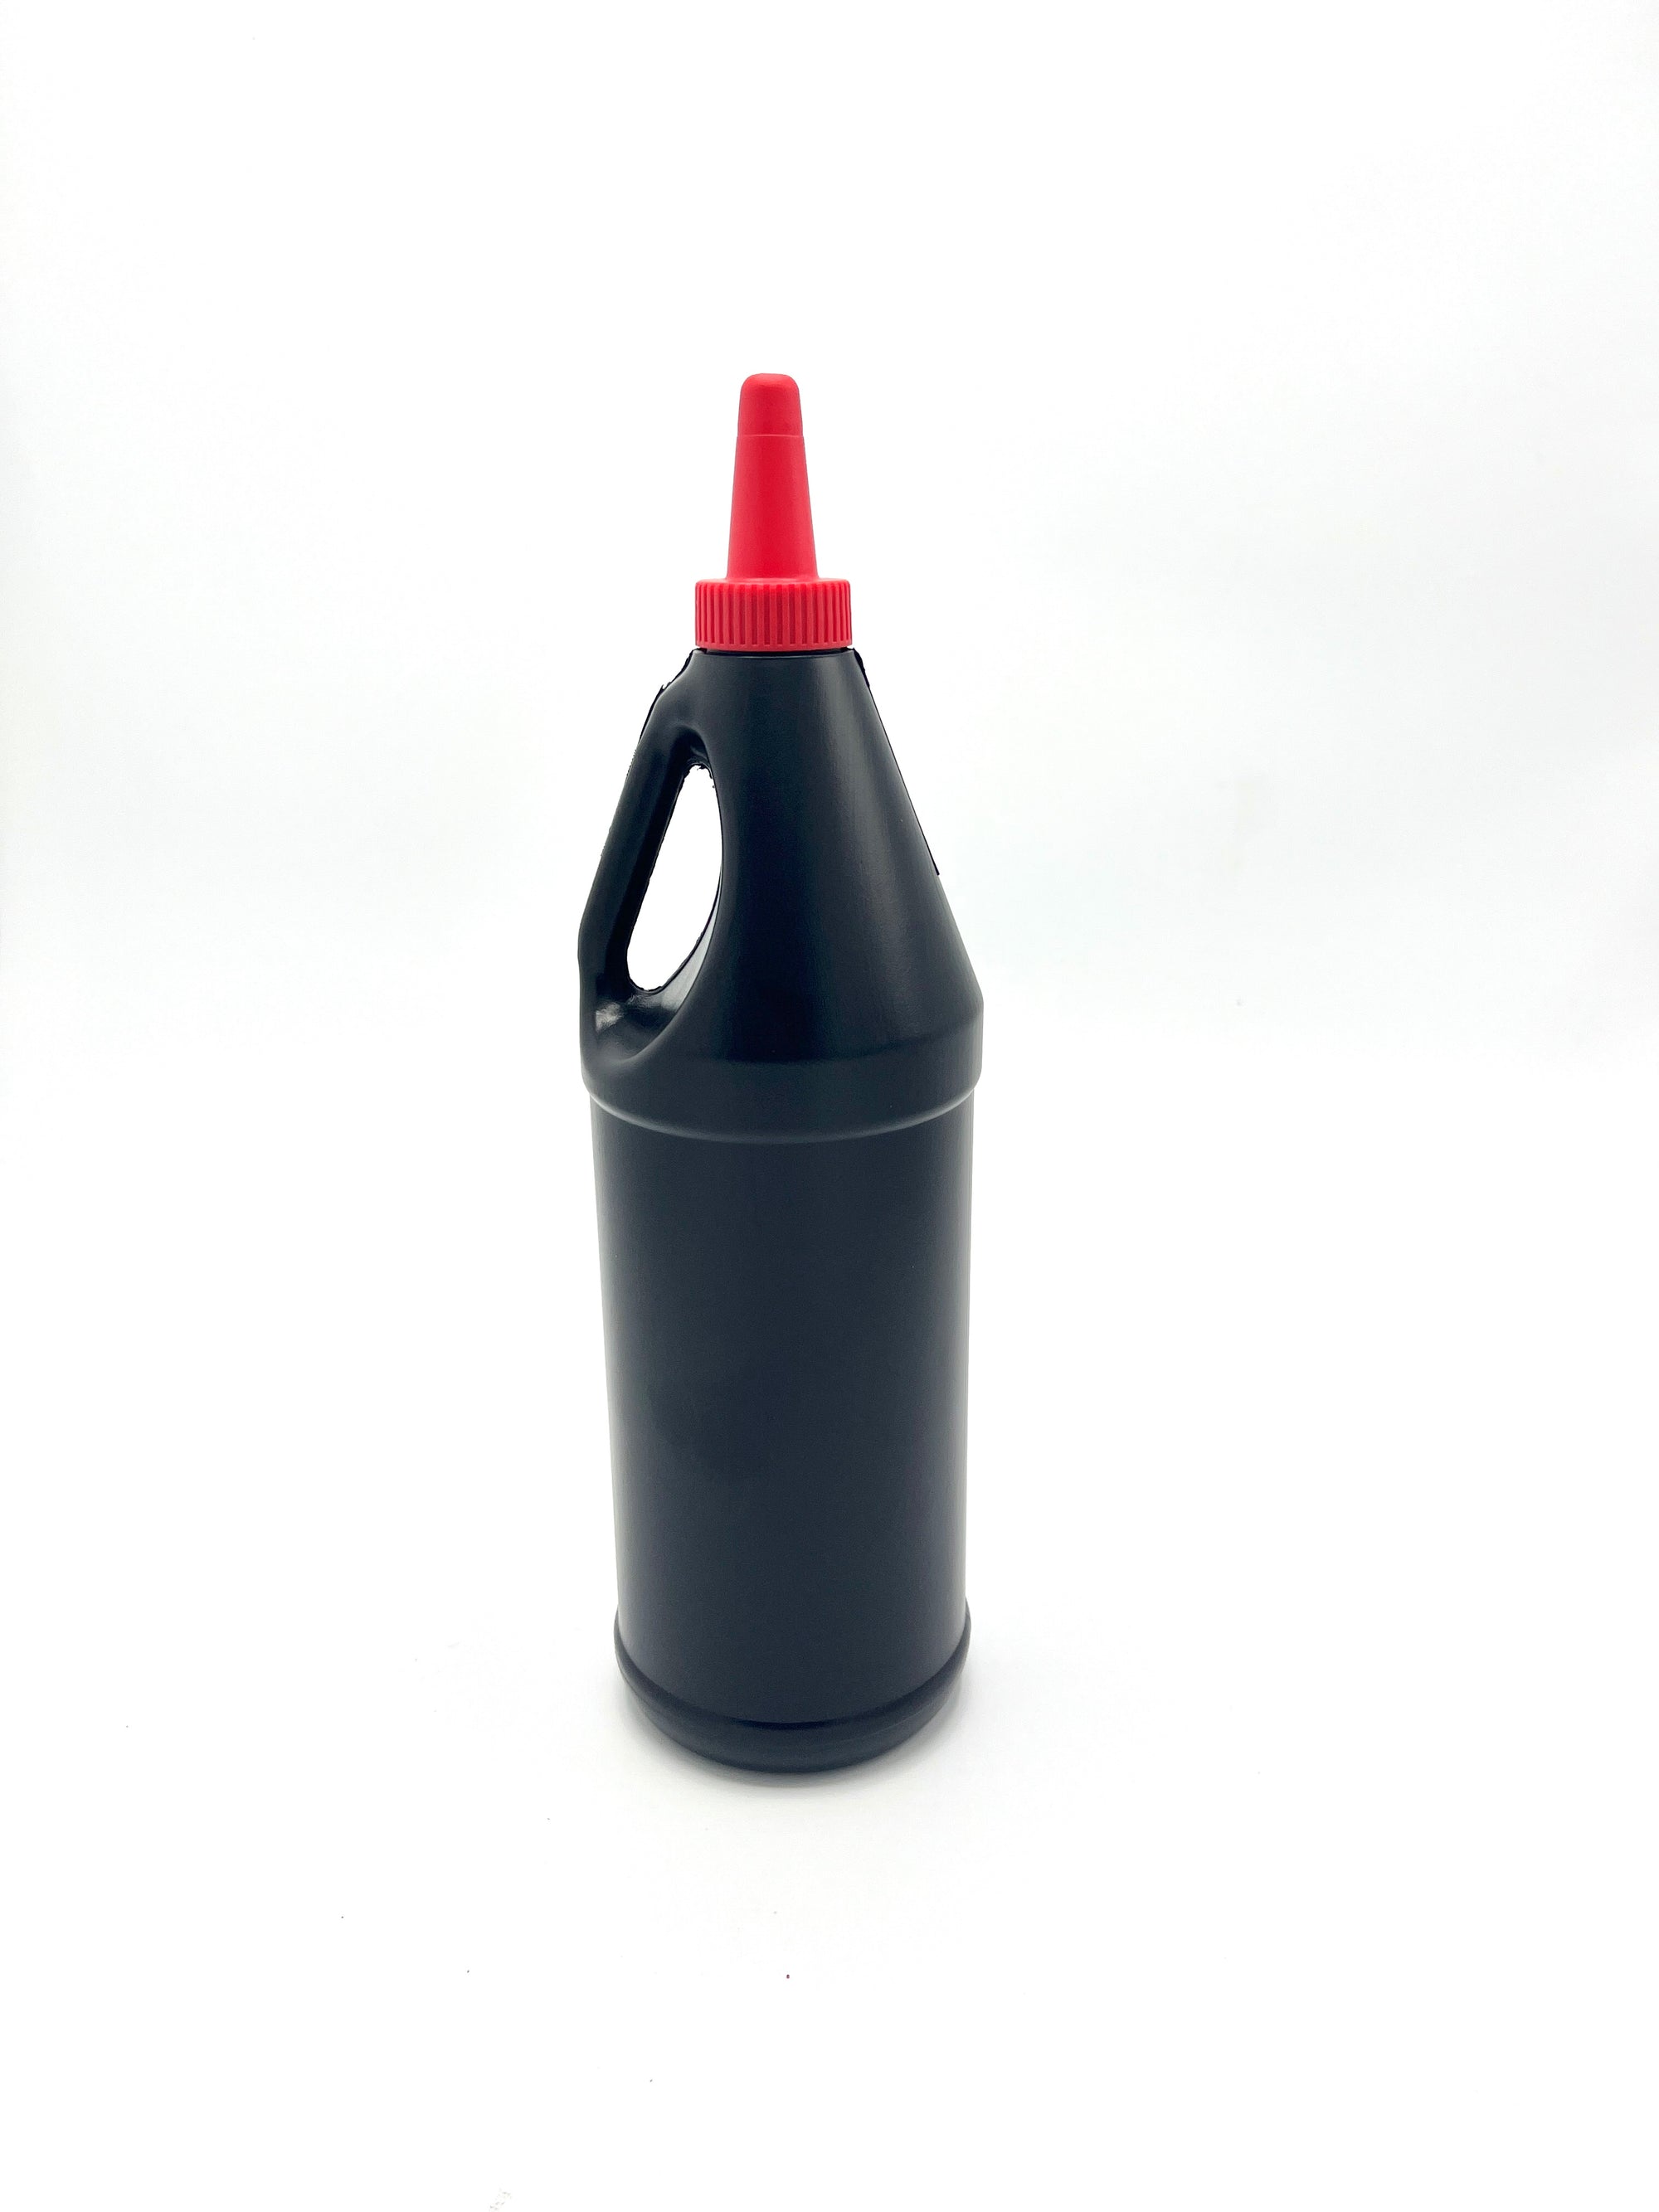 32oz Black HDPE Industrial Round Grab-N-Go Jug with Red No Hole Spout Cap